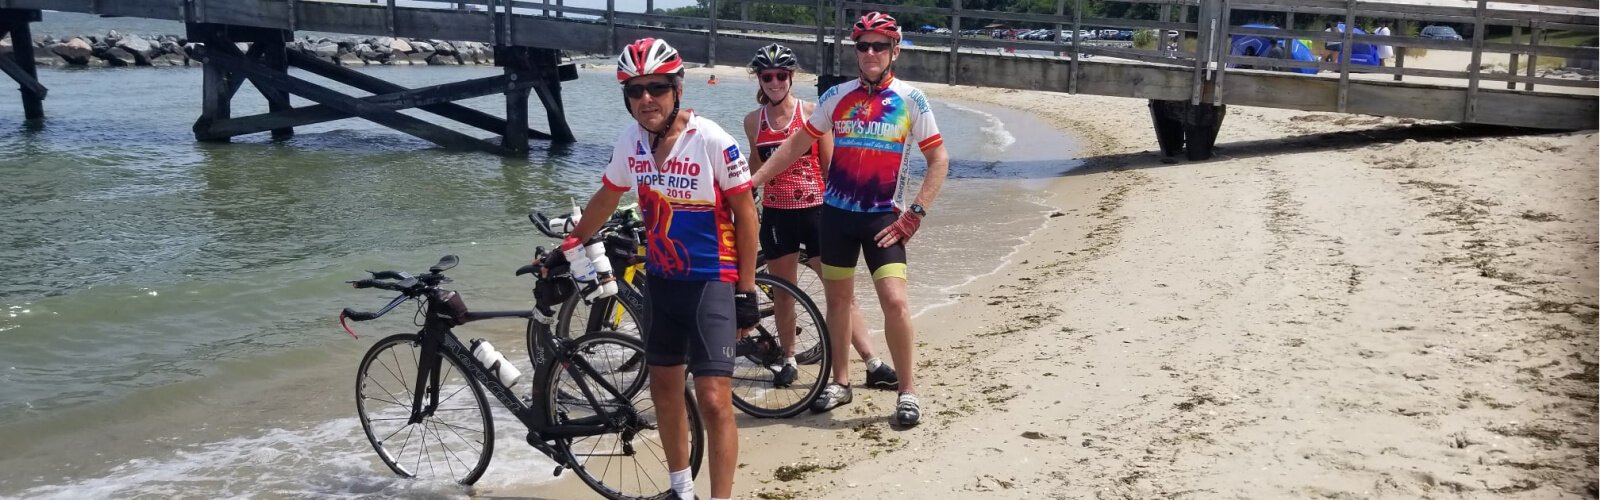 After 42 days, the riders, who started in Oregon, touched their wheels to the Atlantic in Virginia.